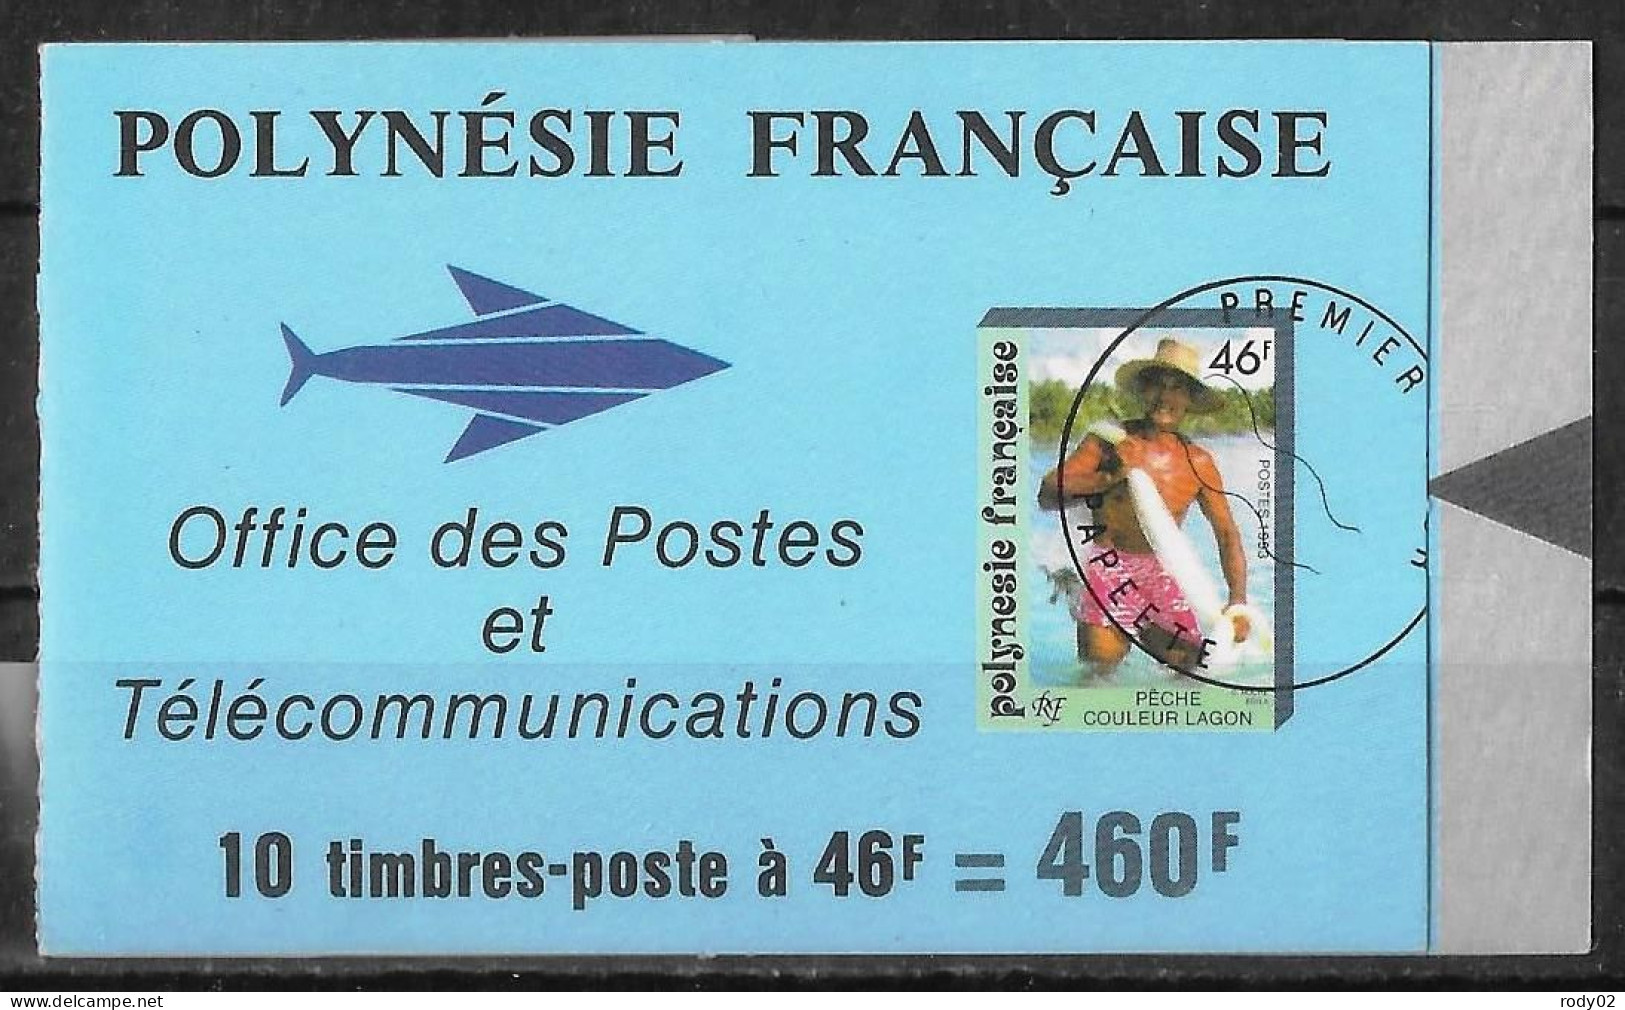 POLYNESIE FRANCAISE - PECHEUR A L'EPERVIER - CARNET N° 427 - NEUF** MNH - Booklets